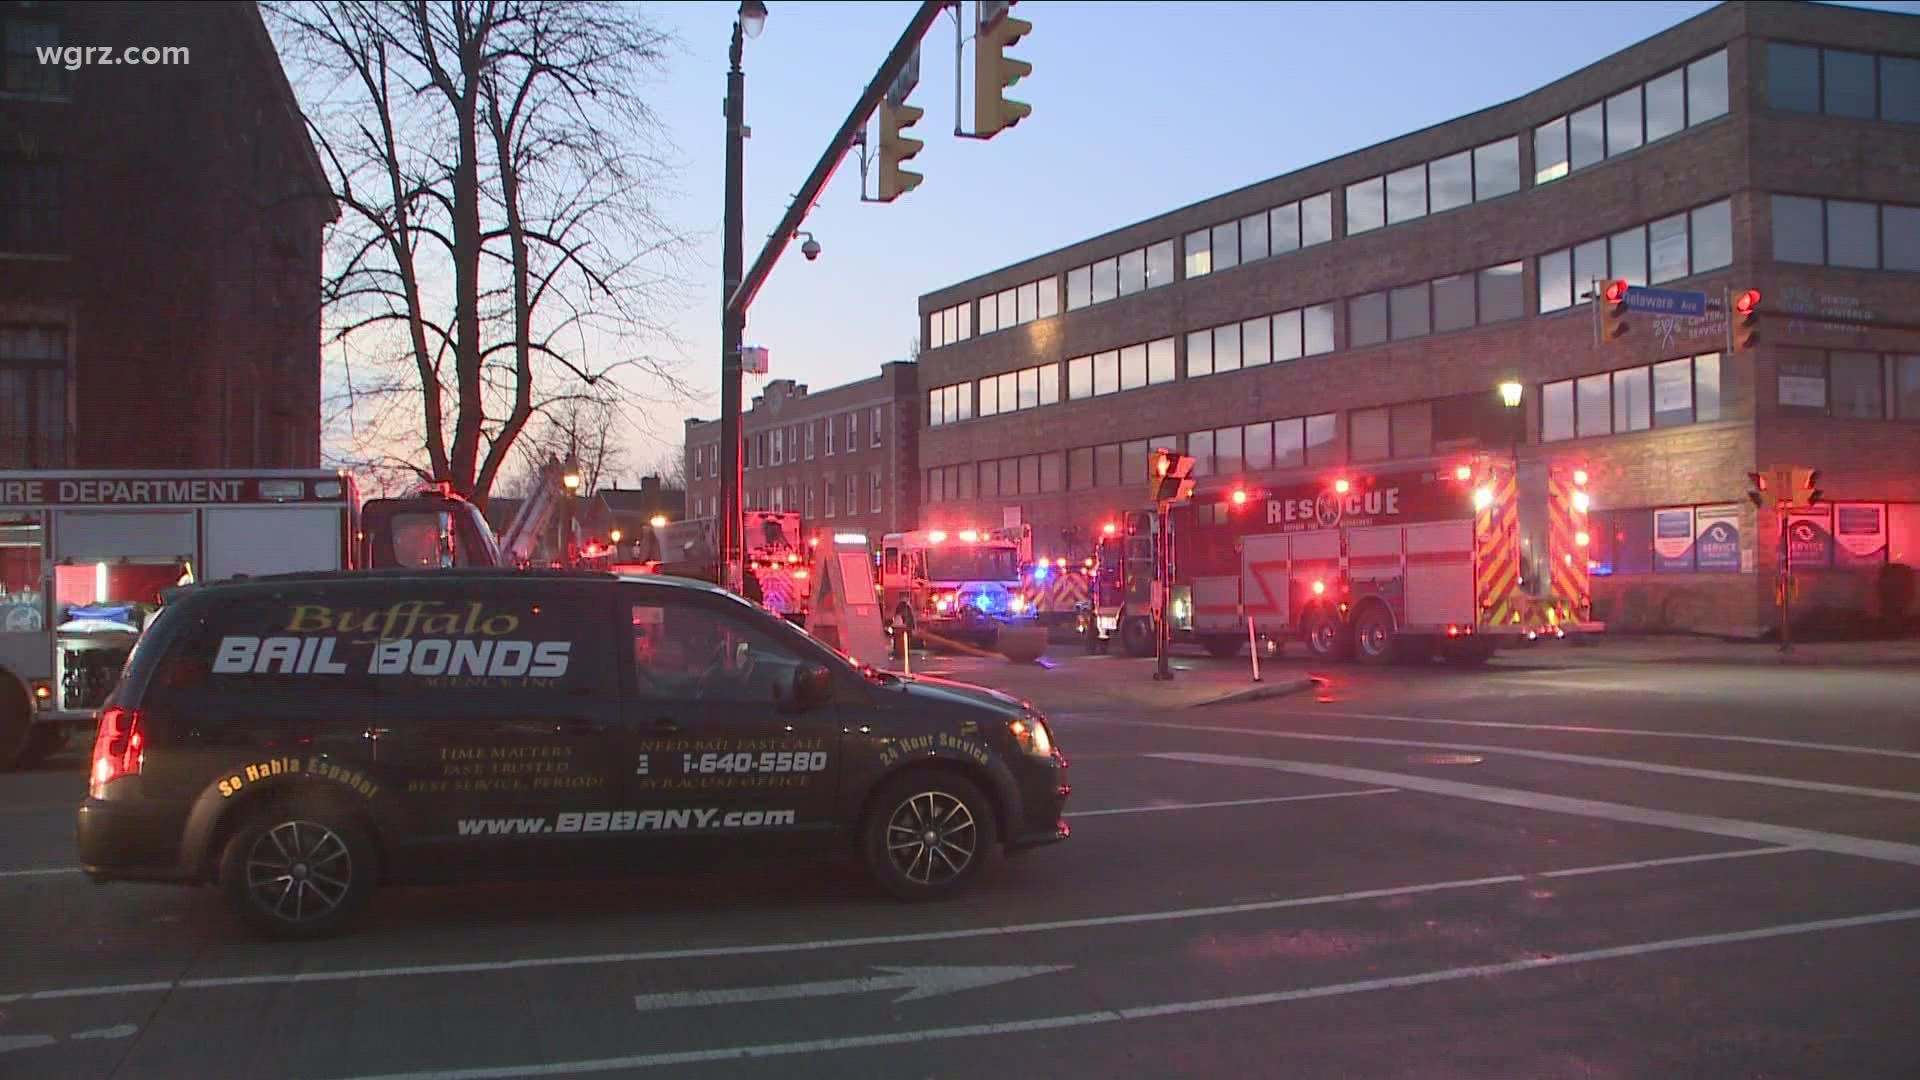 A fire in Allentown is being under investigation as arson according to Buffalo fire leaders.